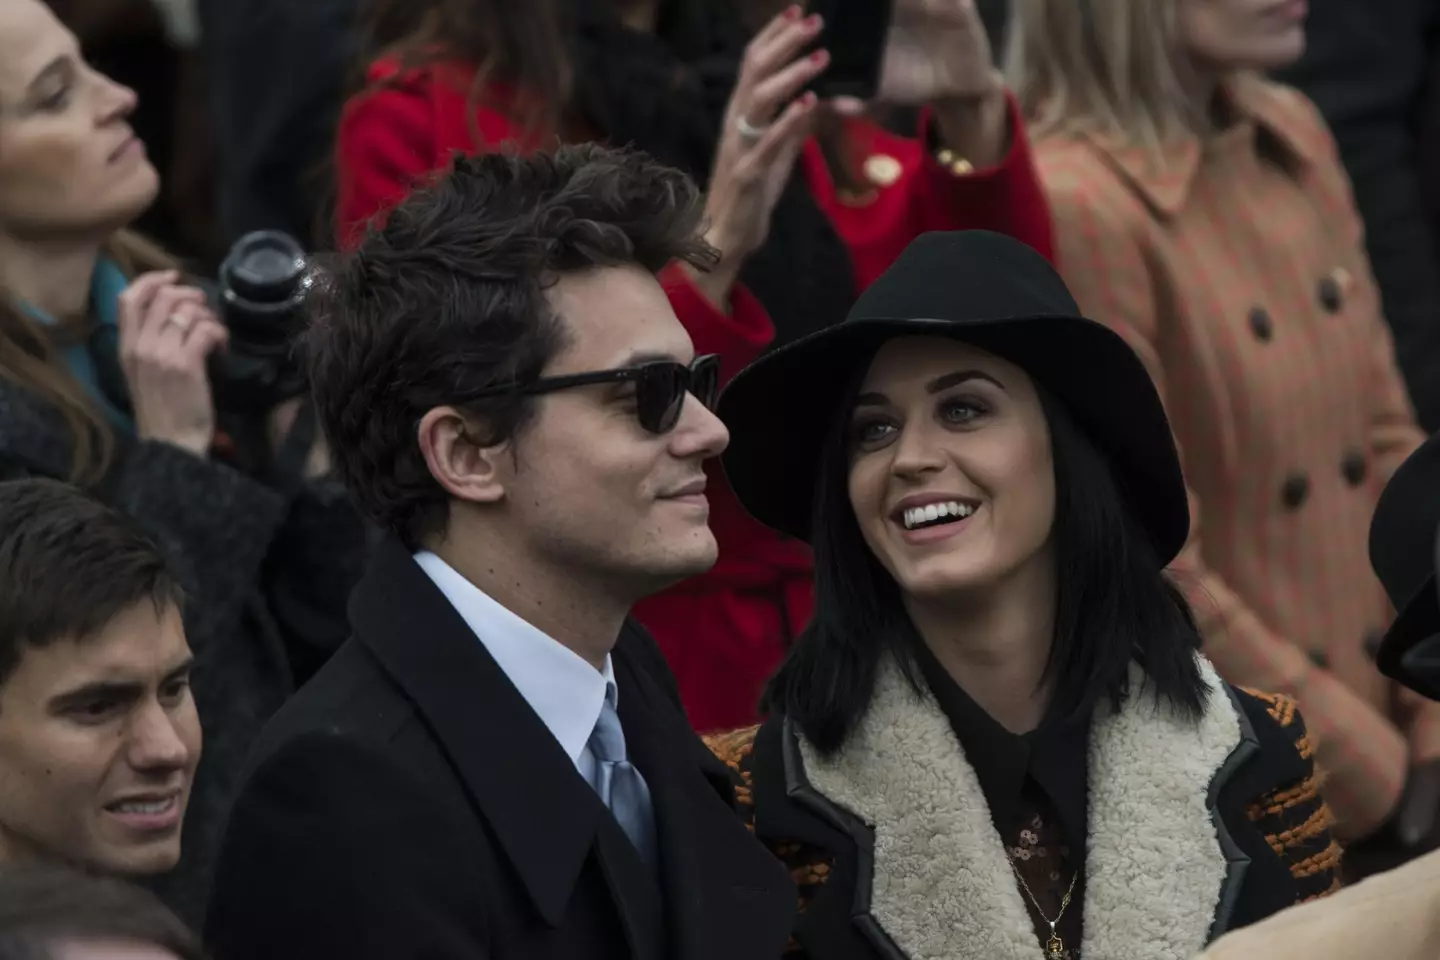 John Mayer previously dated Katy Perry.